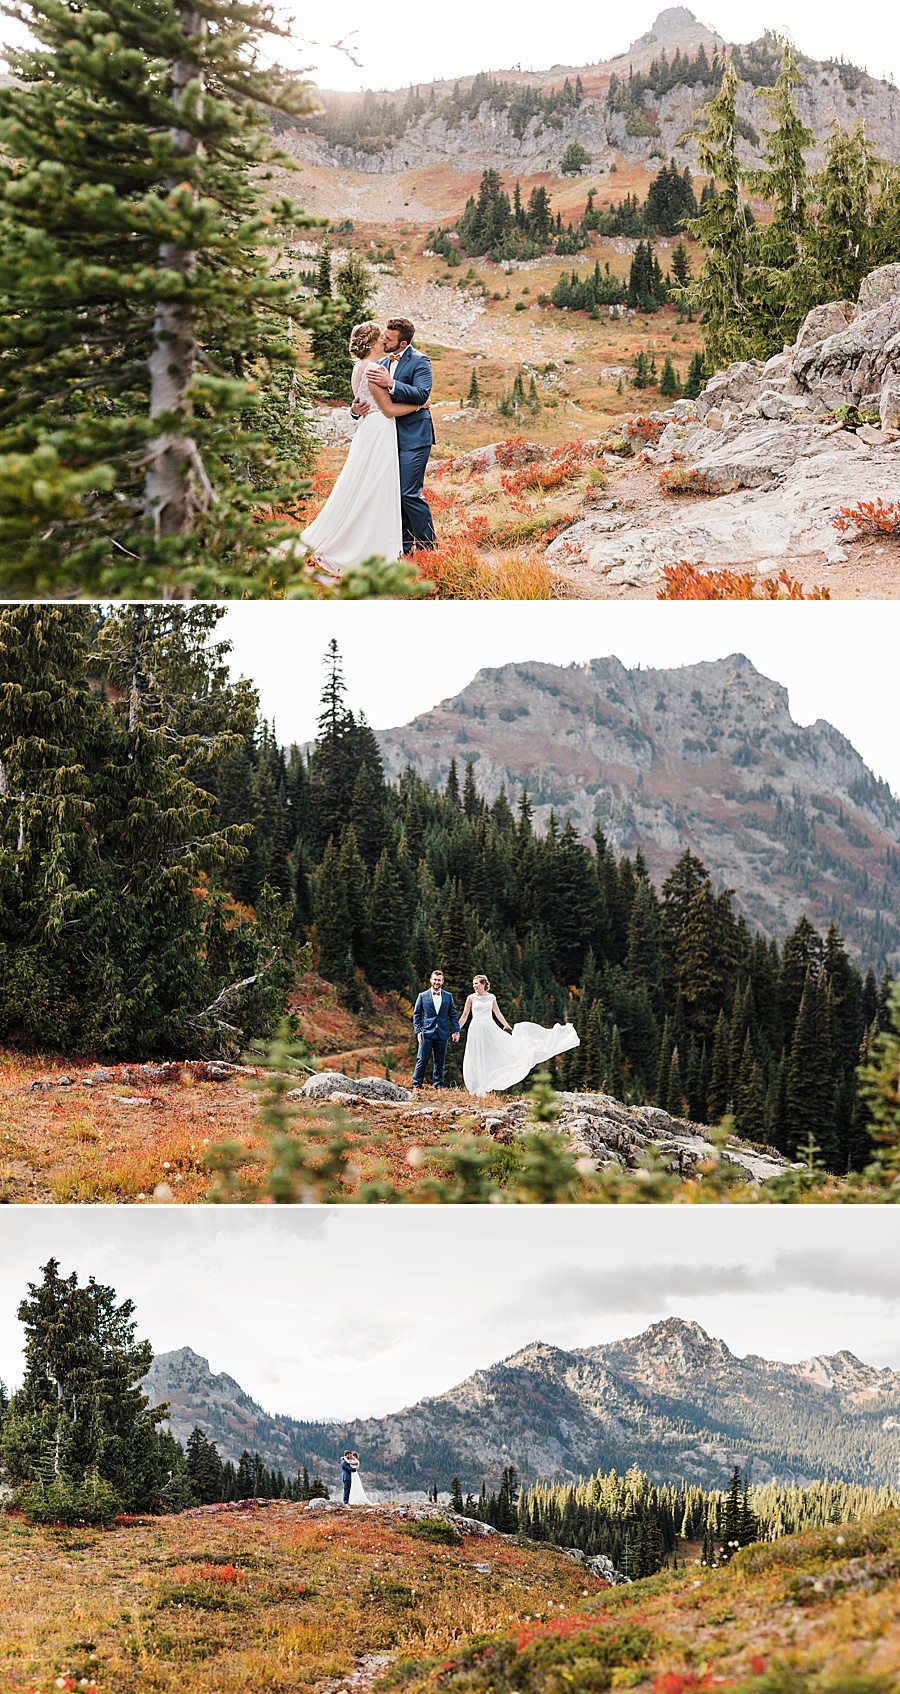 A bride and groom among mountain vista scenes on a beautiful fall day near Chinook Pass during their hiking elopement by Amy Galbraith